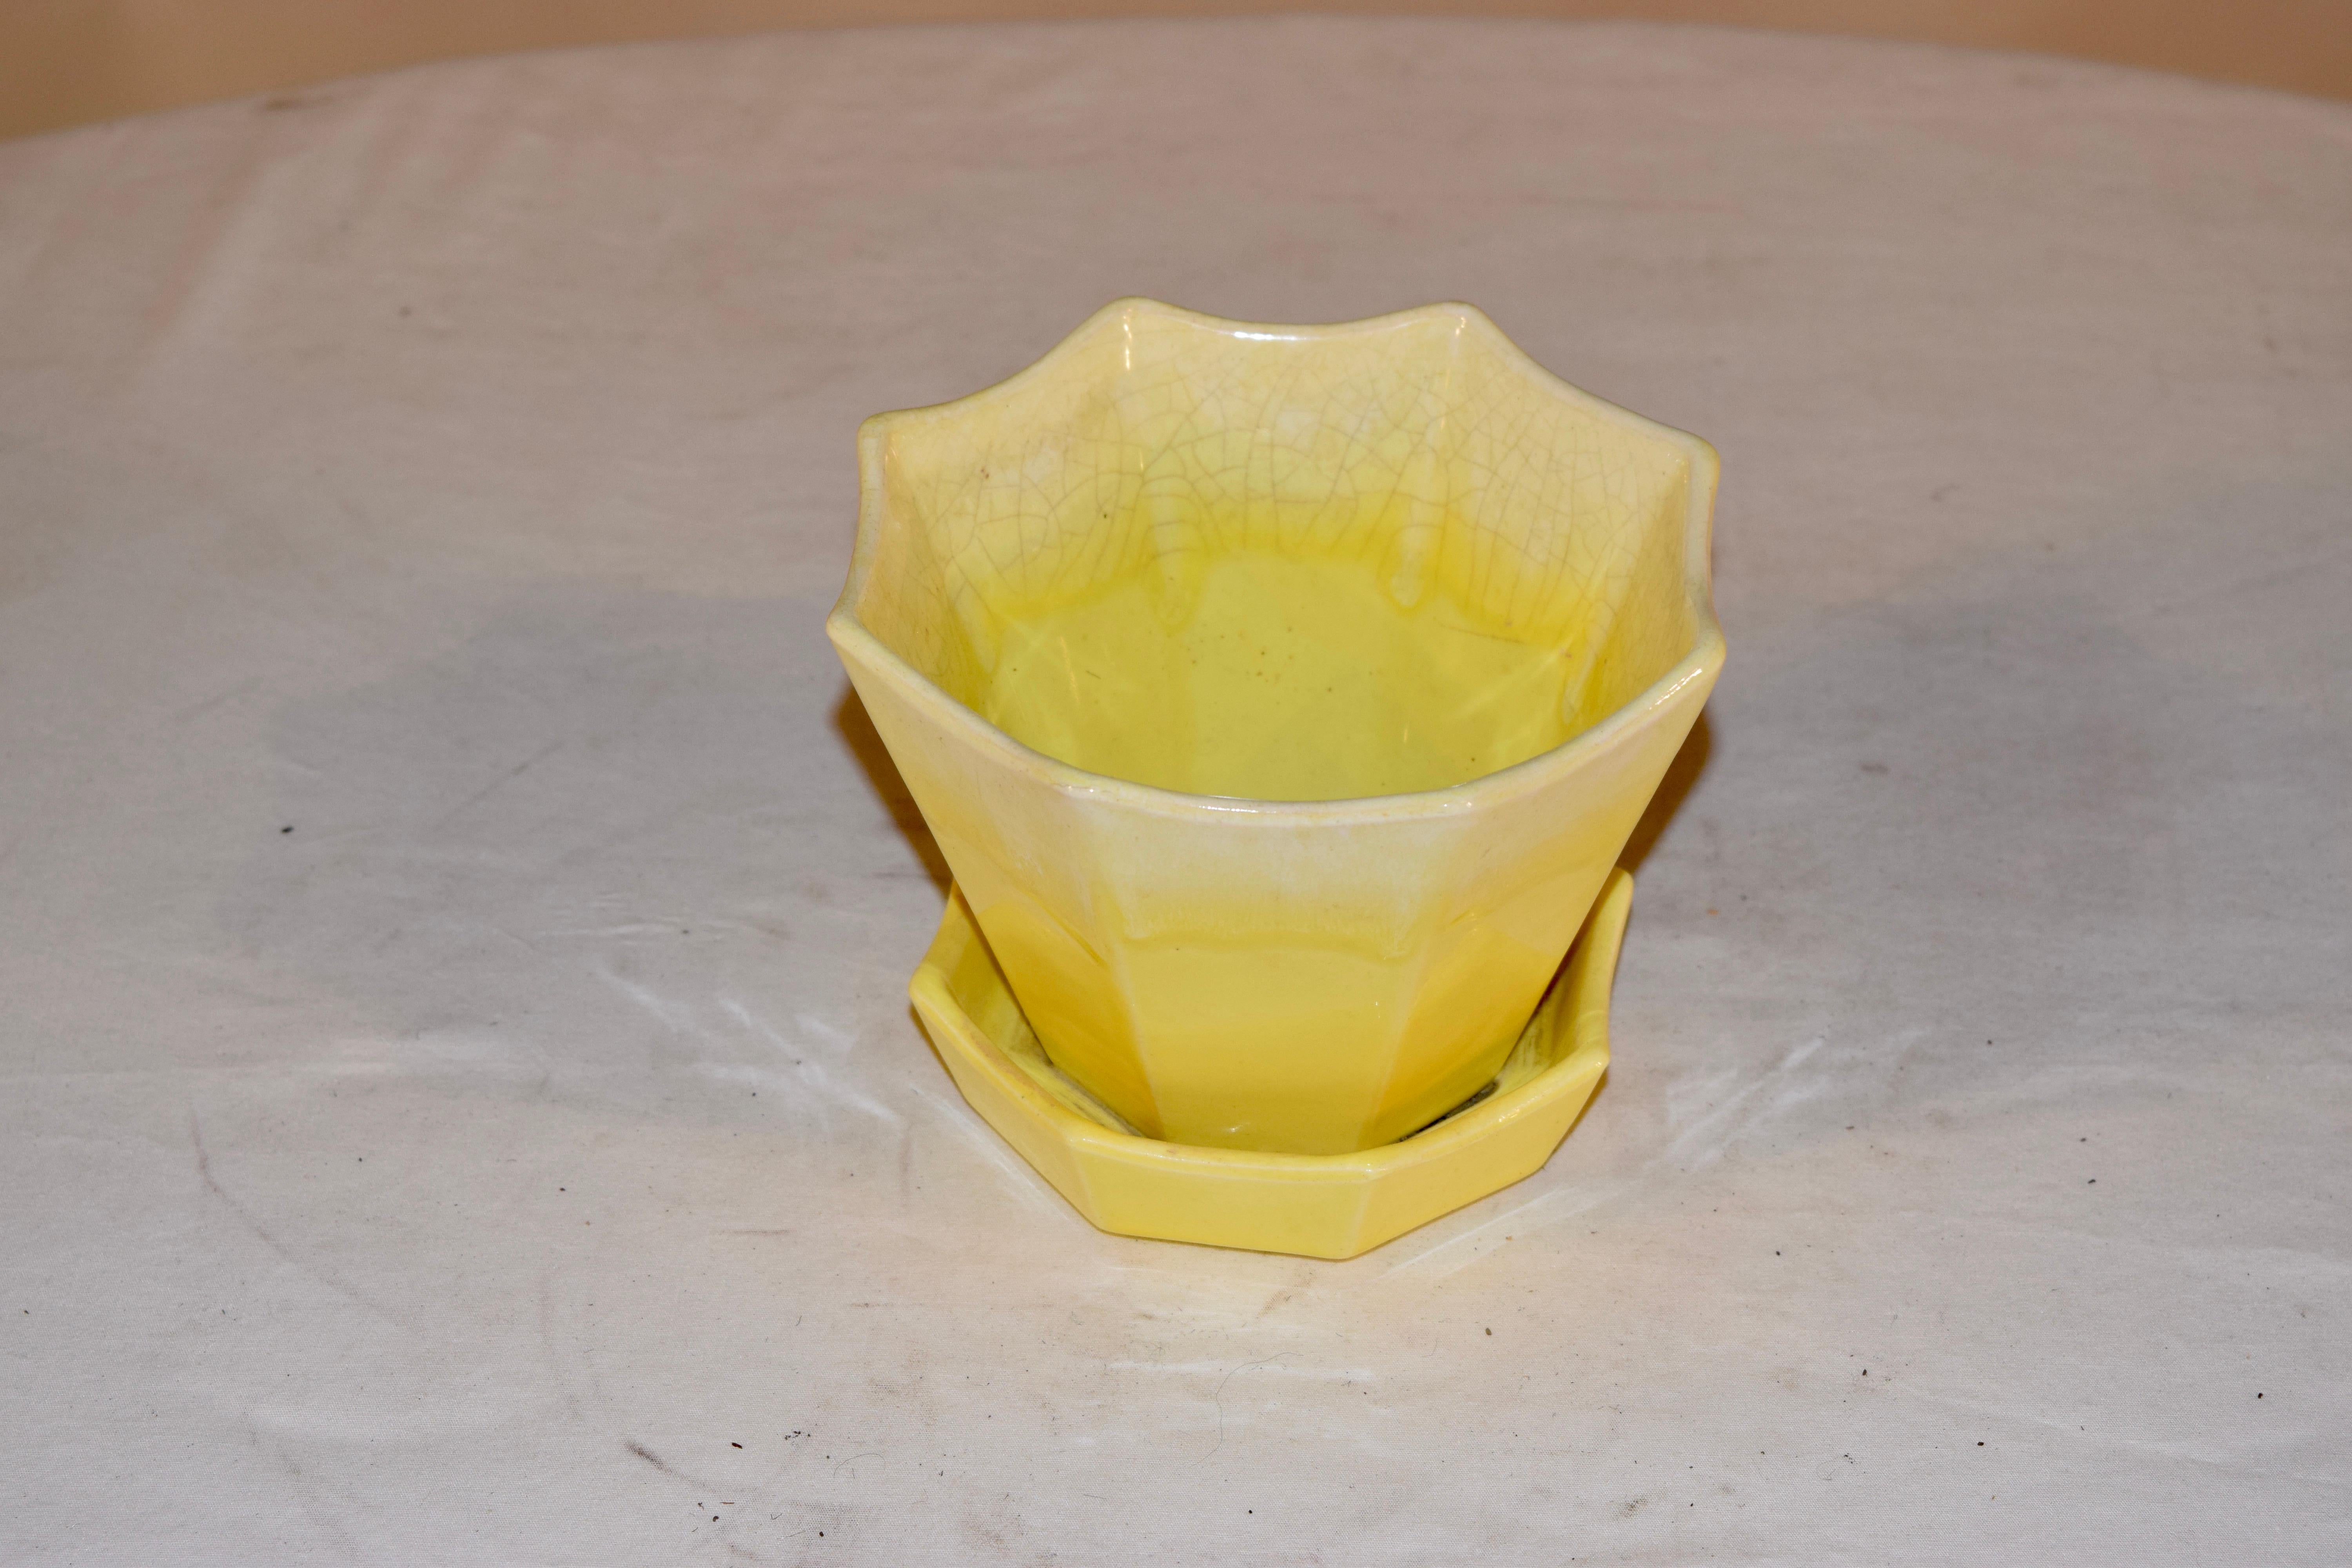 Signed coronet flower pot with attached saucer with a drain hole in a lovely yellow which is lighter at the top and gets darker as it goes down. It has a star shape and is stamped Coronet 201 USA on the bottom.